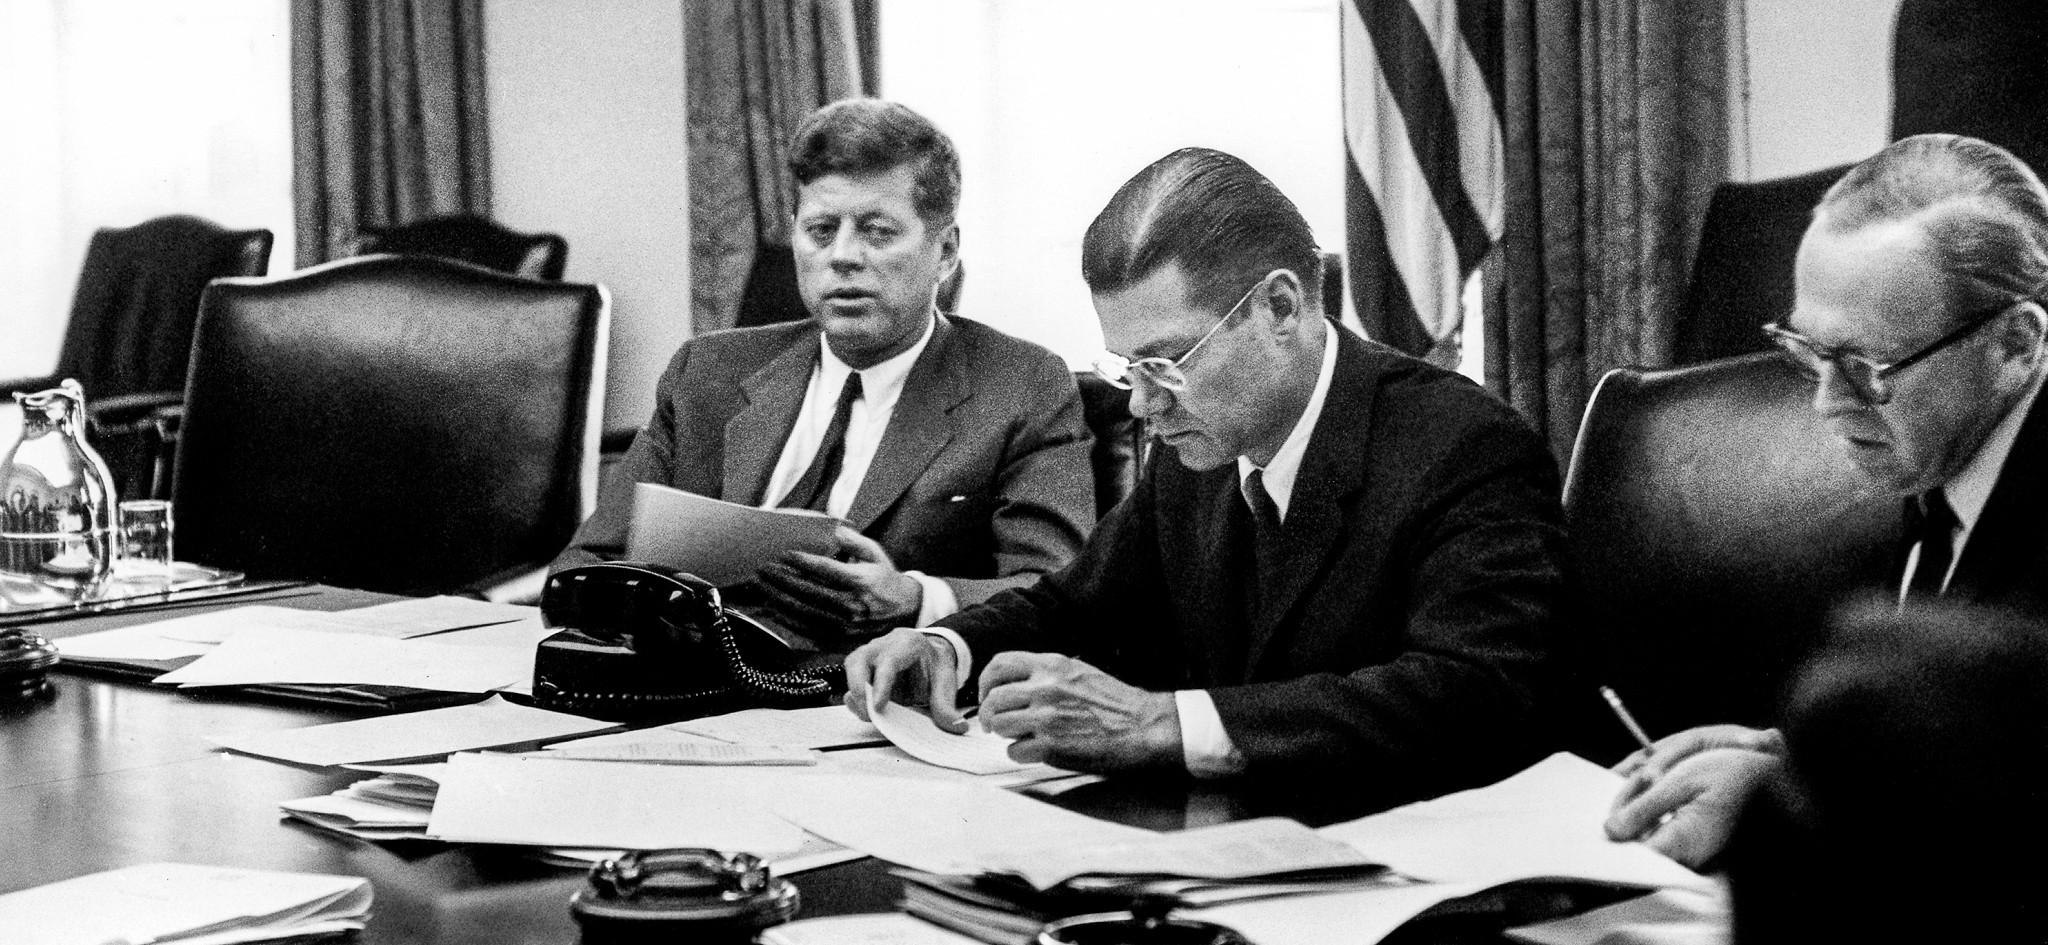 John F. Kennedy in a cabinet meeting with